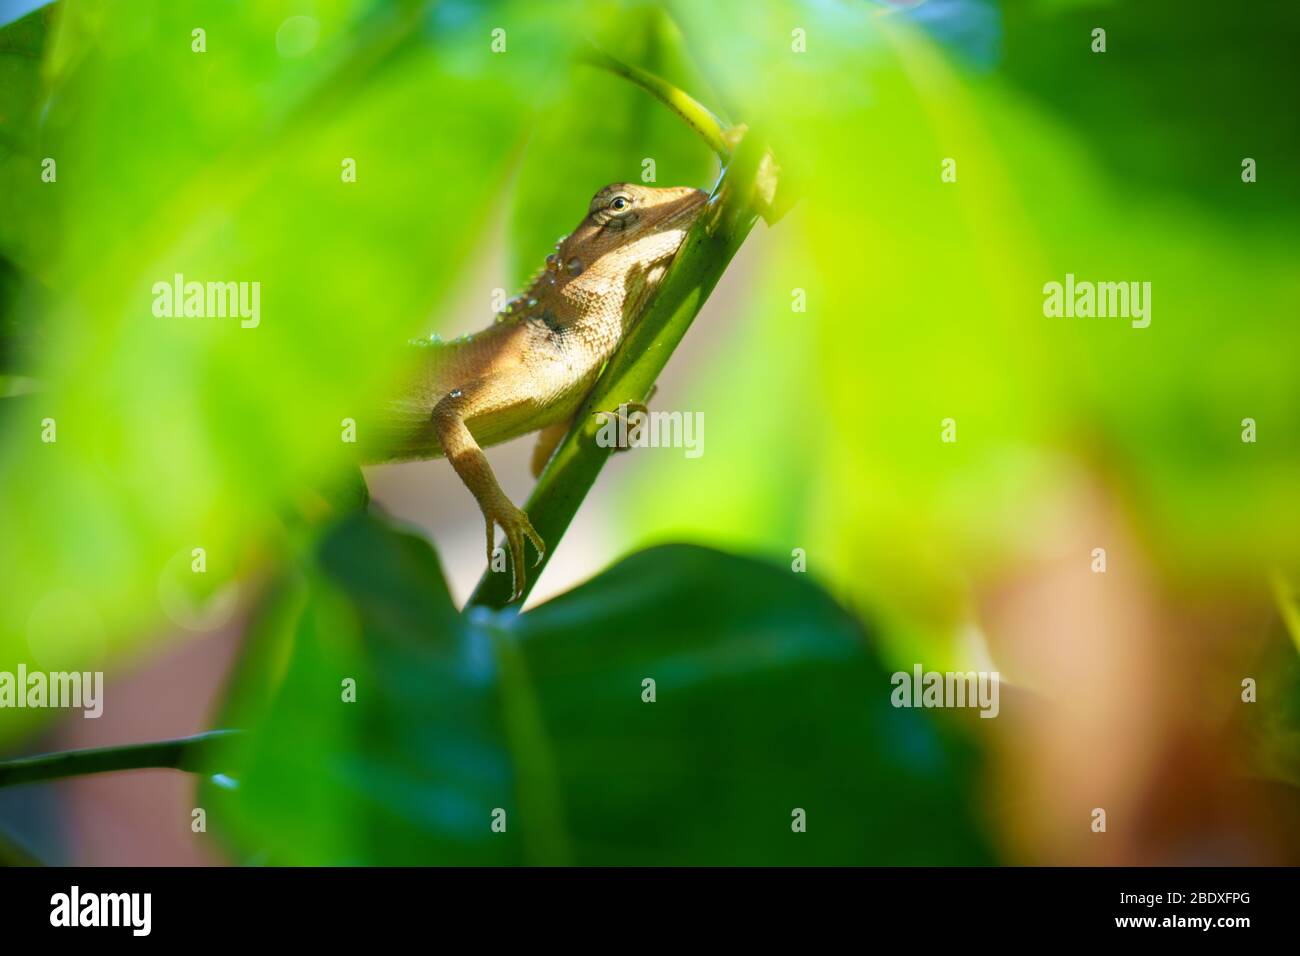 close up macro concept Garden lizard Oriental garden lizard, Eastern garden lizard, Changeable lizard or Calotes versicolor eating water on trees in t Stock Photo